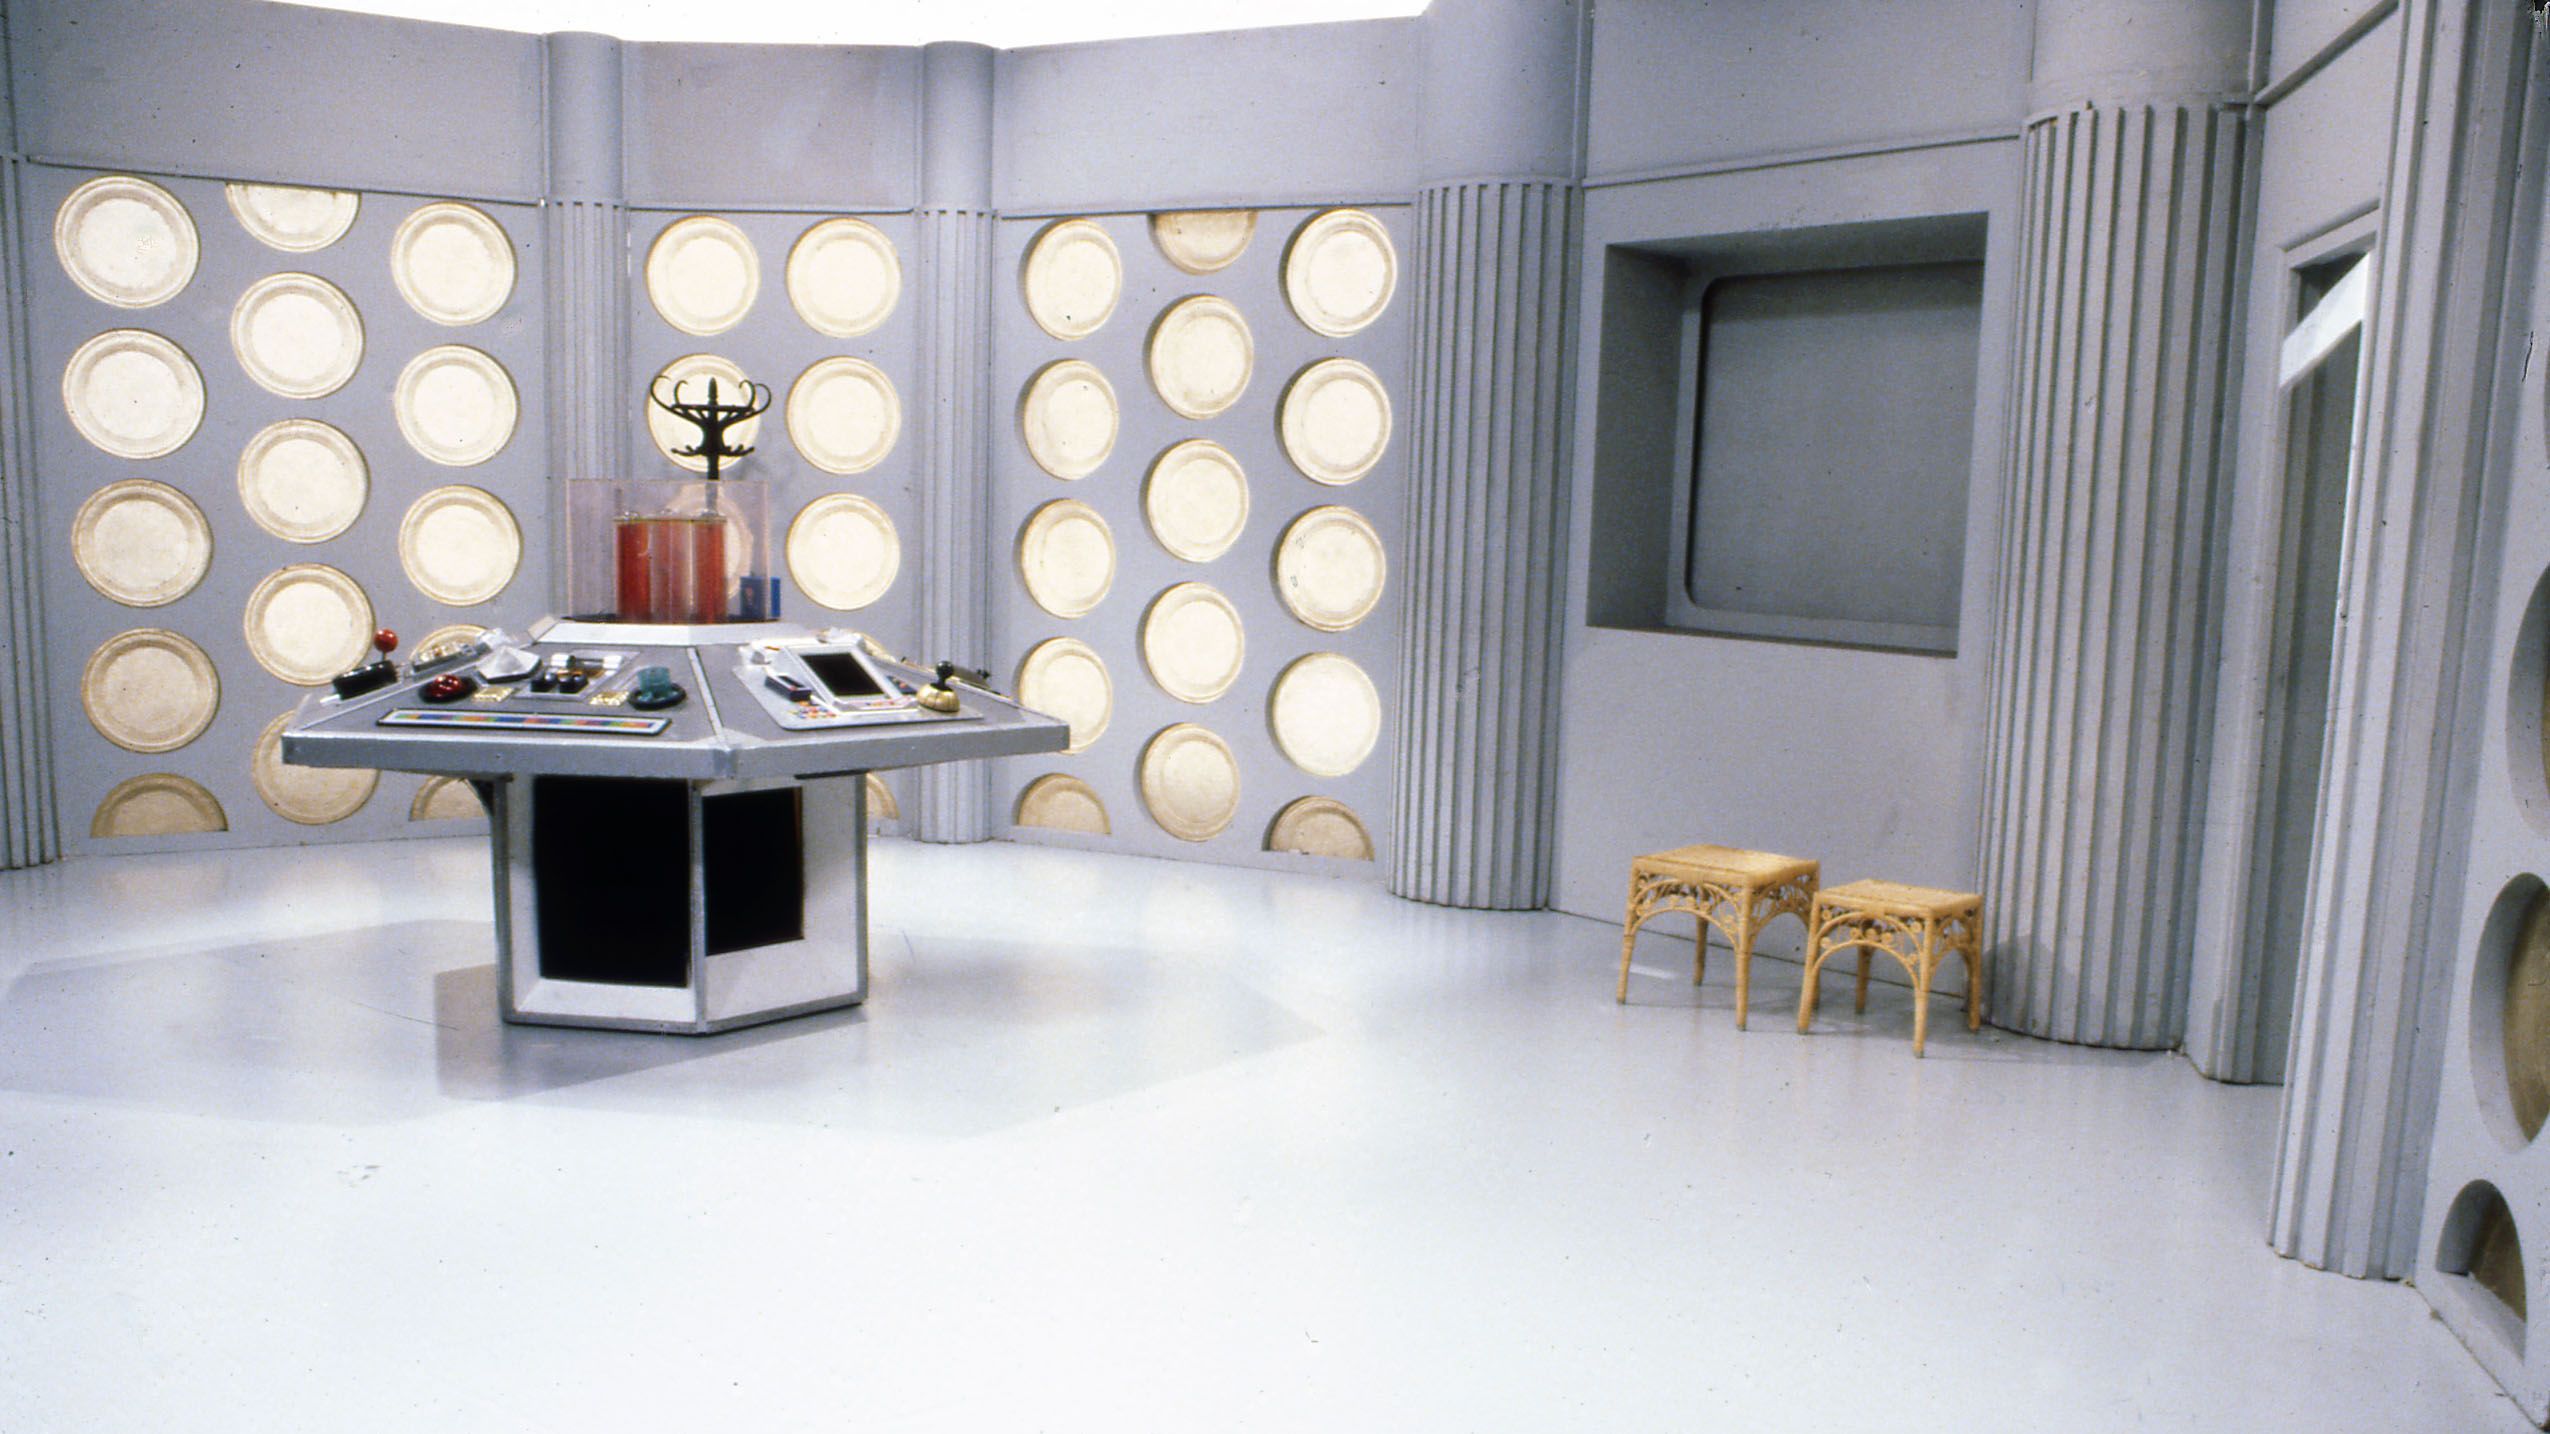 These Empty Bbc Sets Are Monuments To Some Superb Shows image 1